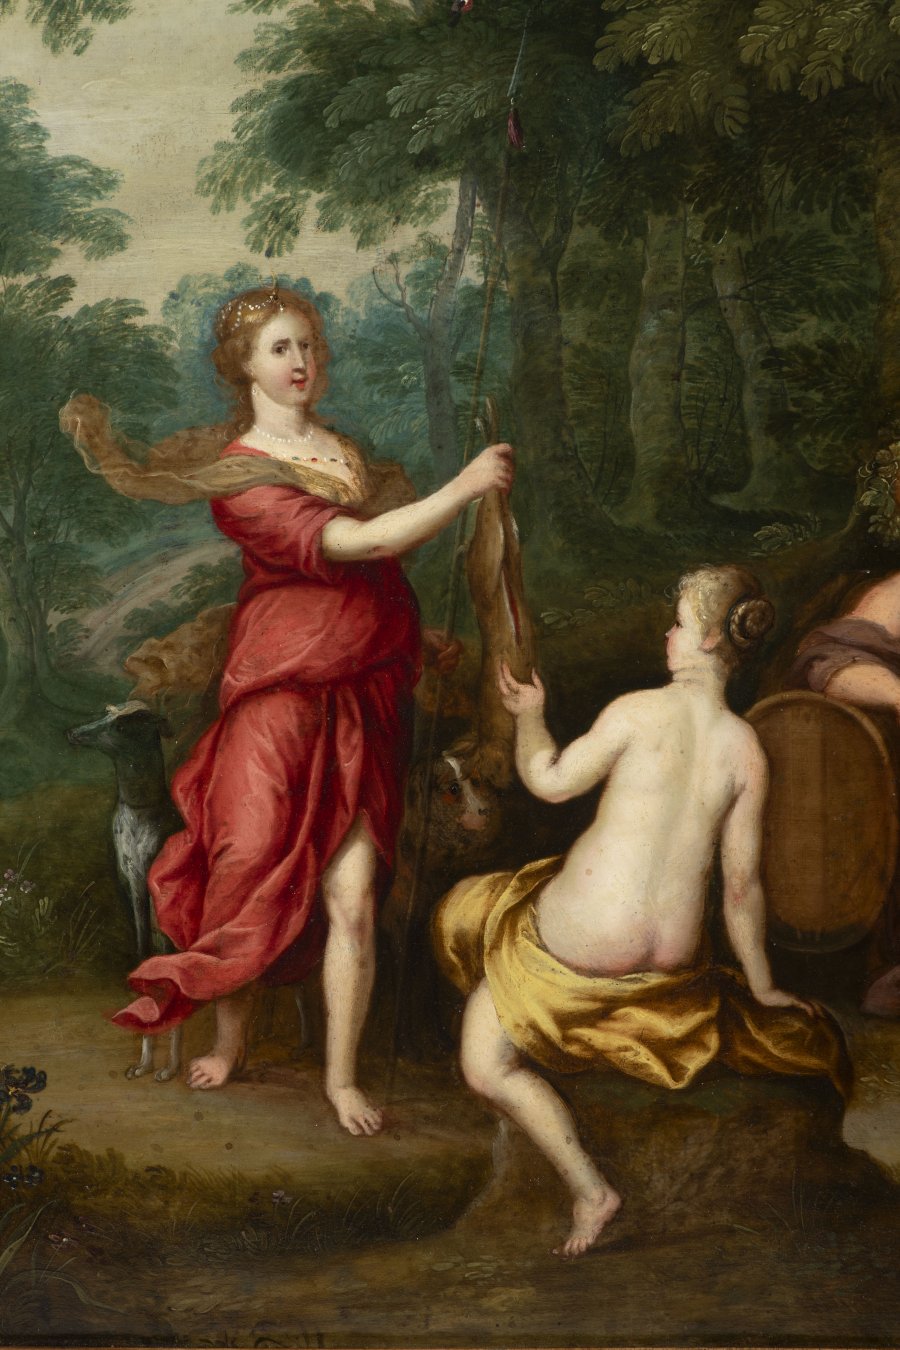 DIANA, BACCHUS AND FLORA